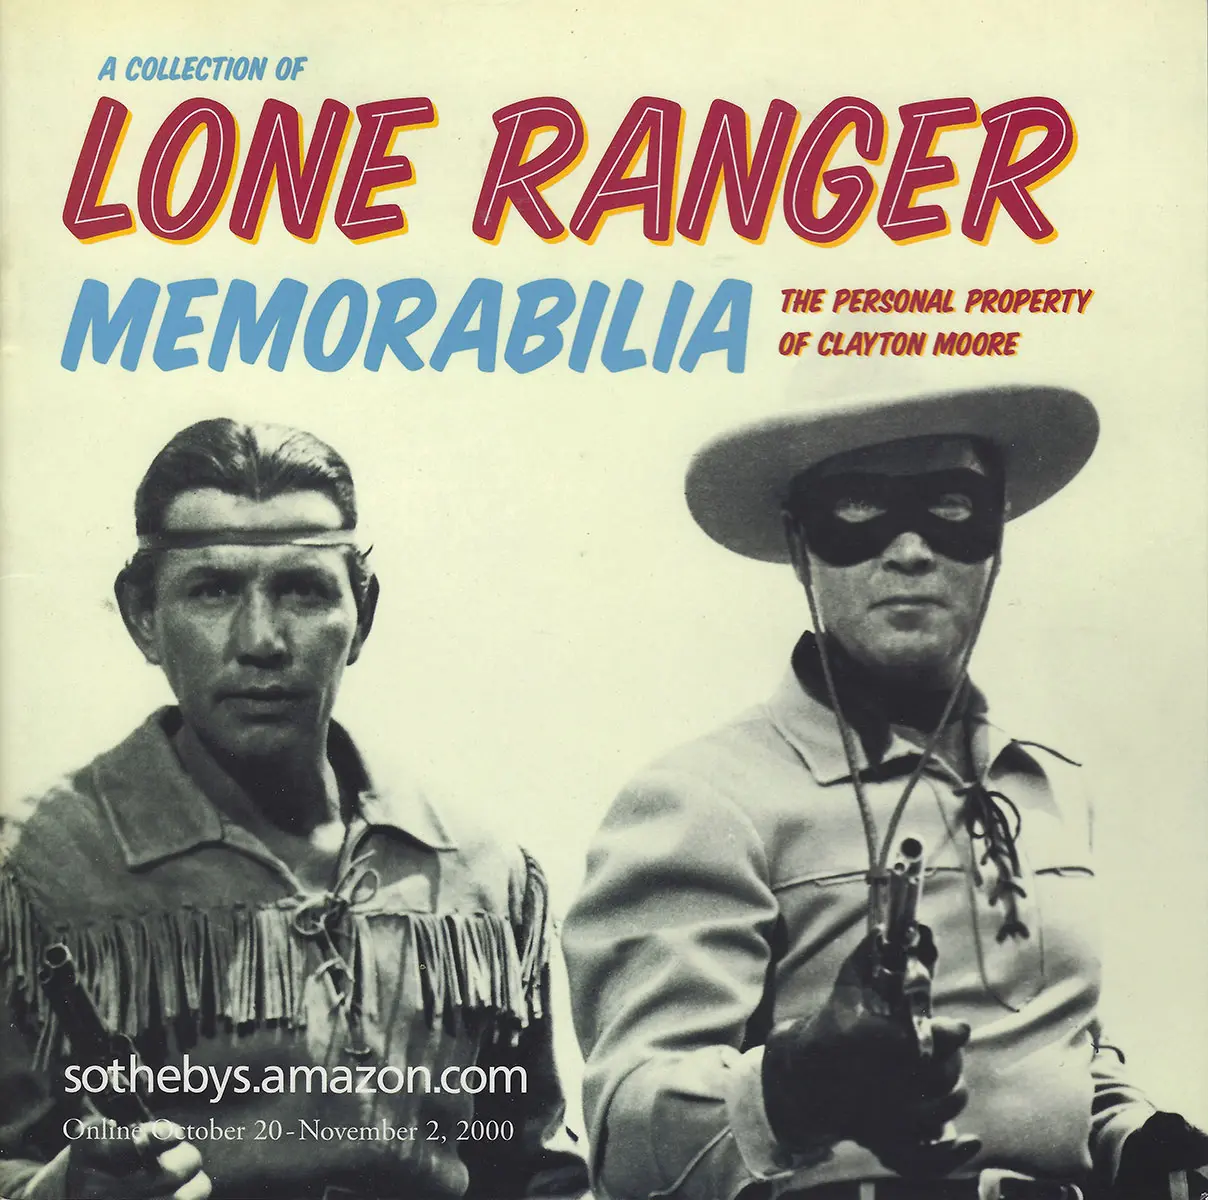 October 20-November 2, 2000 Sothebys.com Auction Of The Collection of Lone Ranger Memorabilia, The Personal Collection of Clayton Moore Auction Catalogue